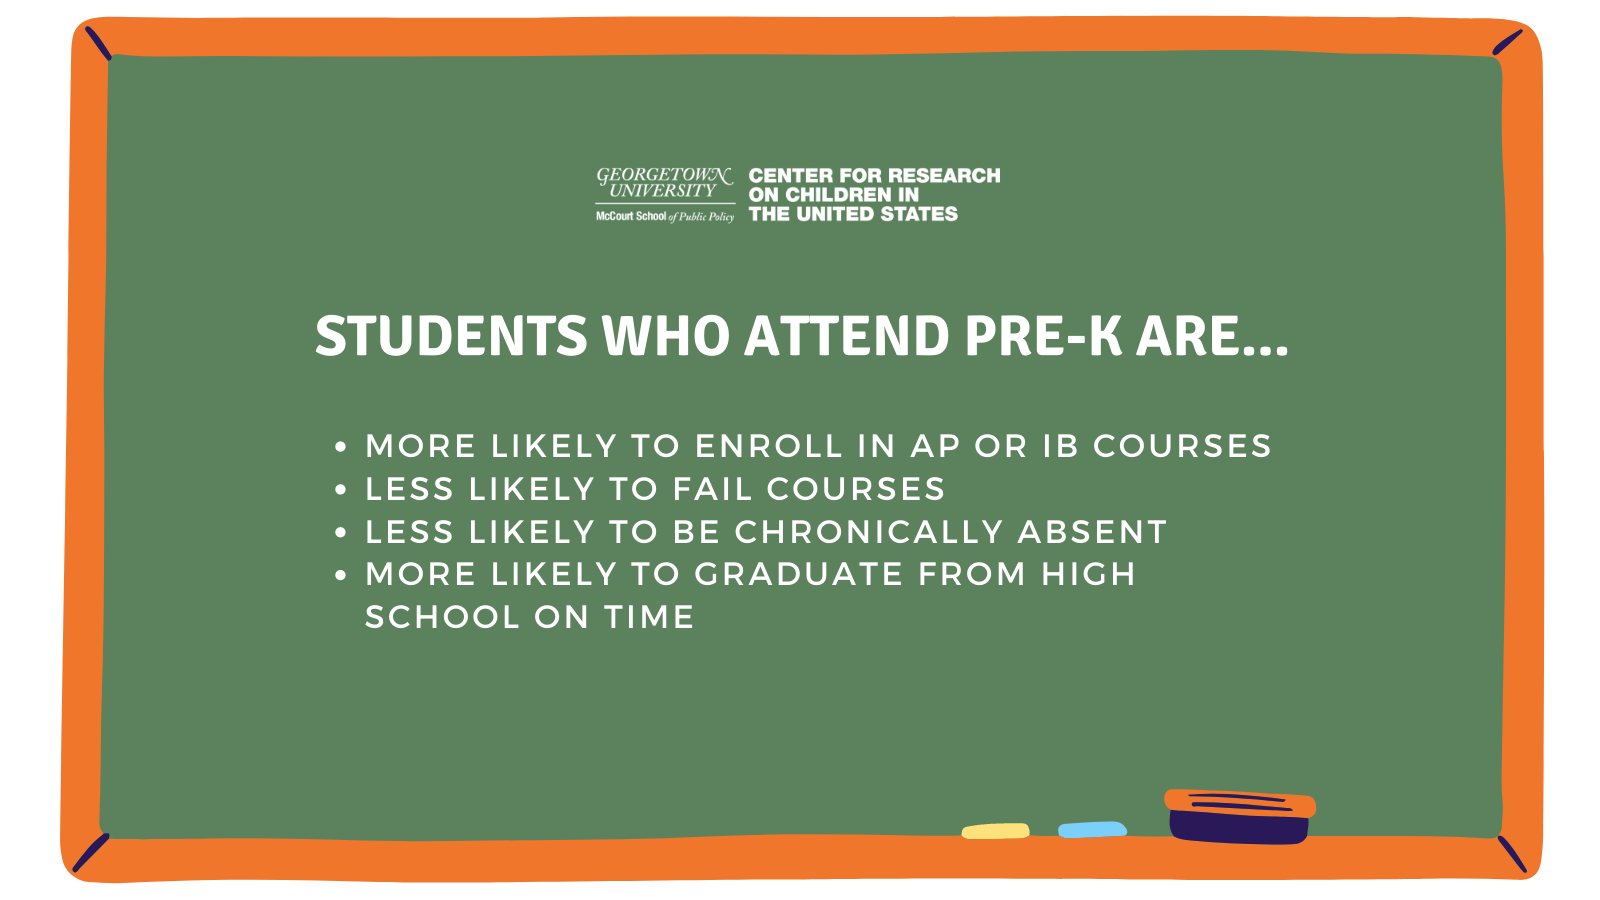 Students who attend pre-K are more likely to enroll in AP or IB courses. Less likely to fail courses. Less likely to be chronically absent. More likely to graduate from high school on time. 